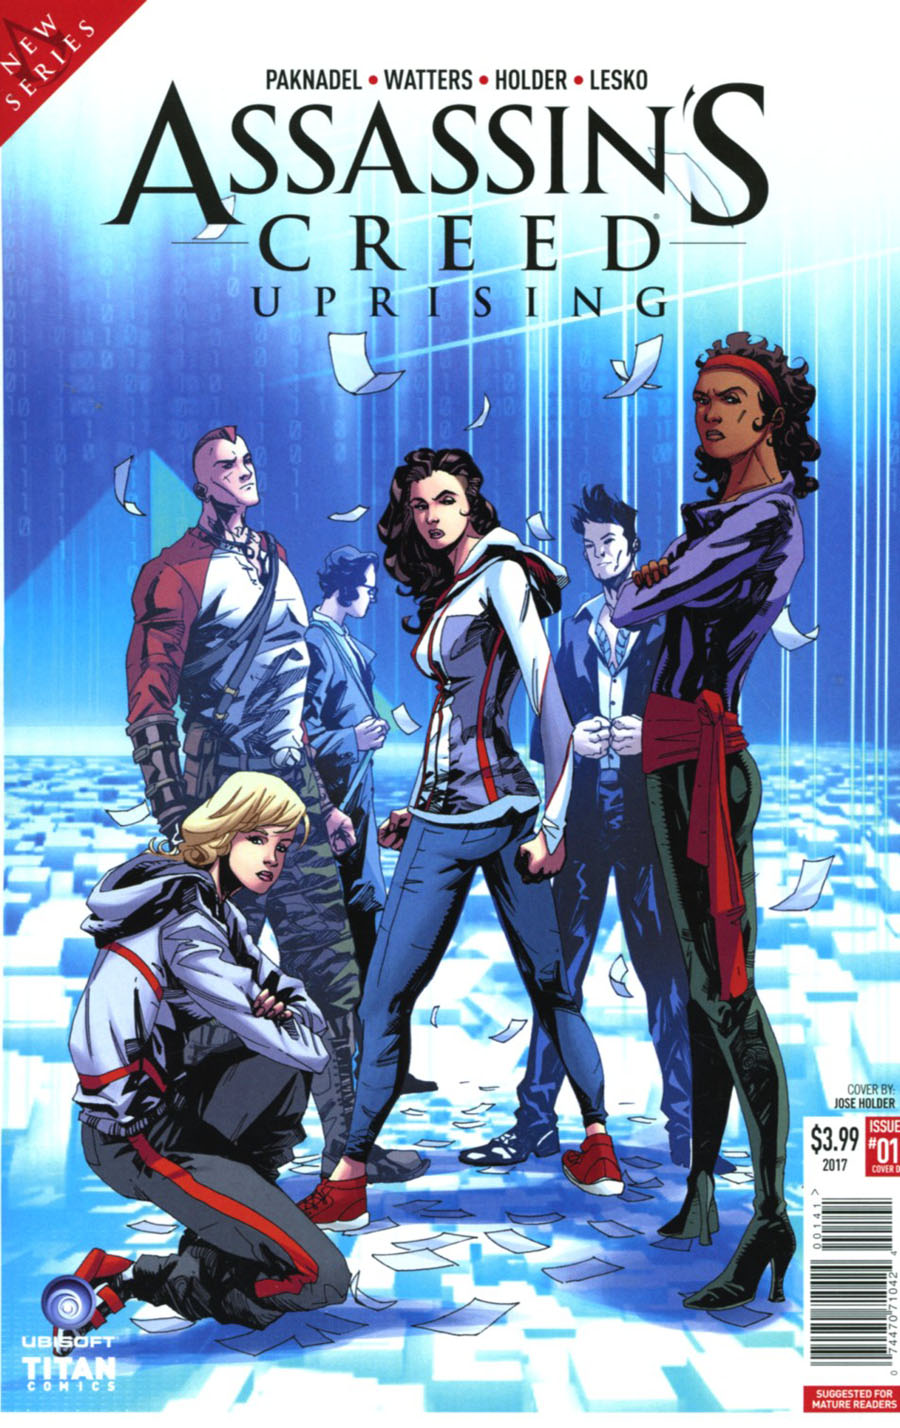 Assassins Creed Uprising #1 Cover D Variant Jose Holder Cover